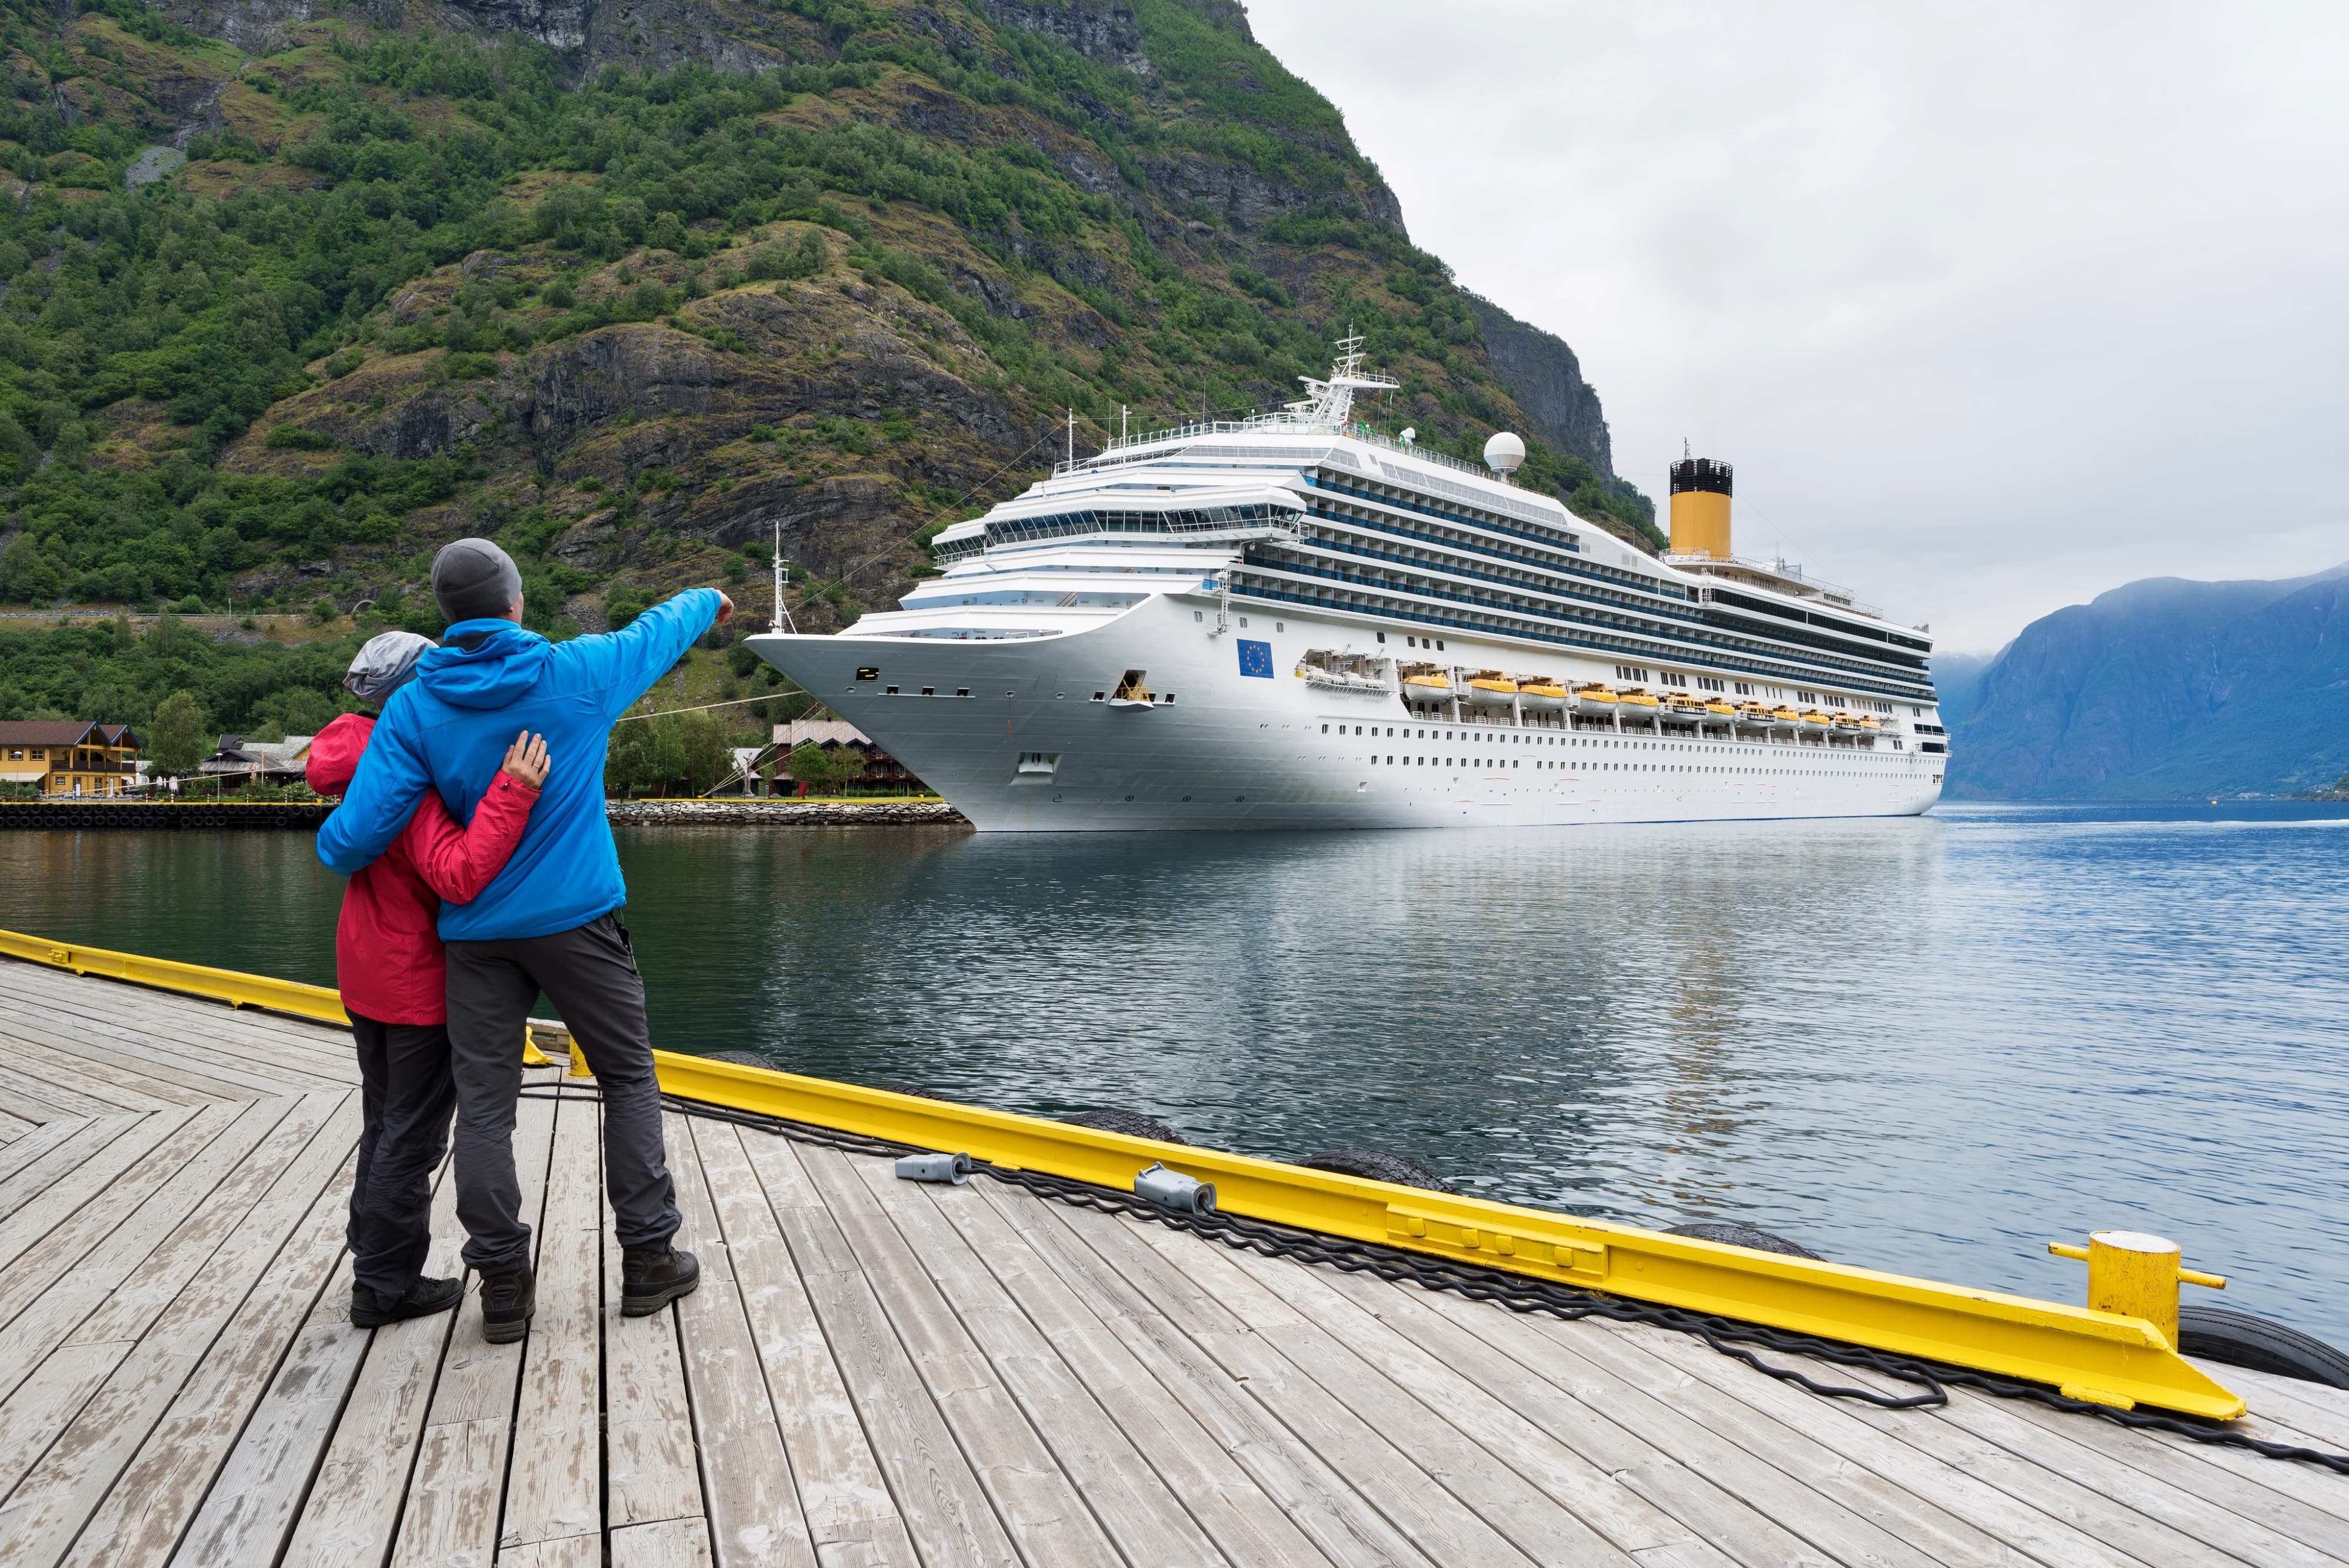 A relationship couple looking at a cruise liner in the waters of Aurlandsfjord, Norway